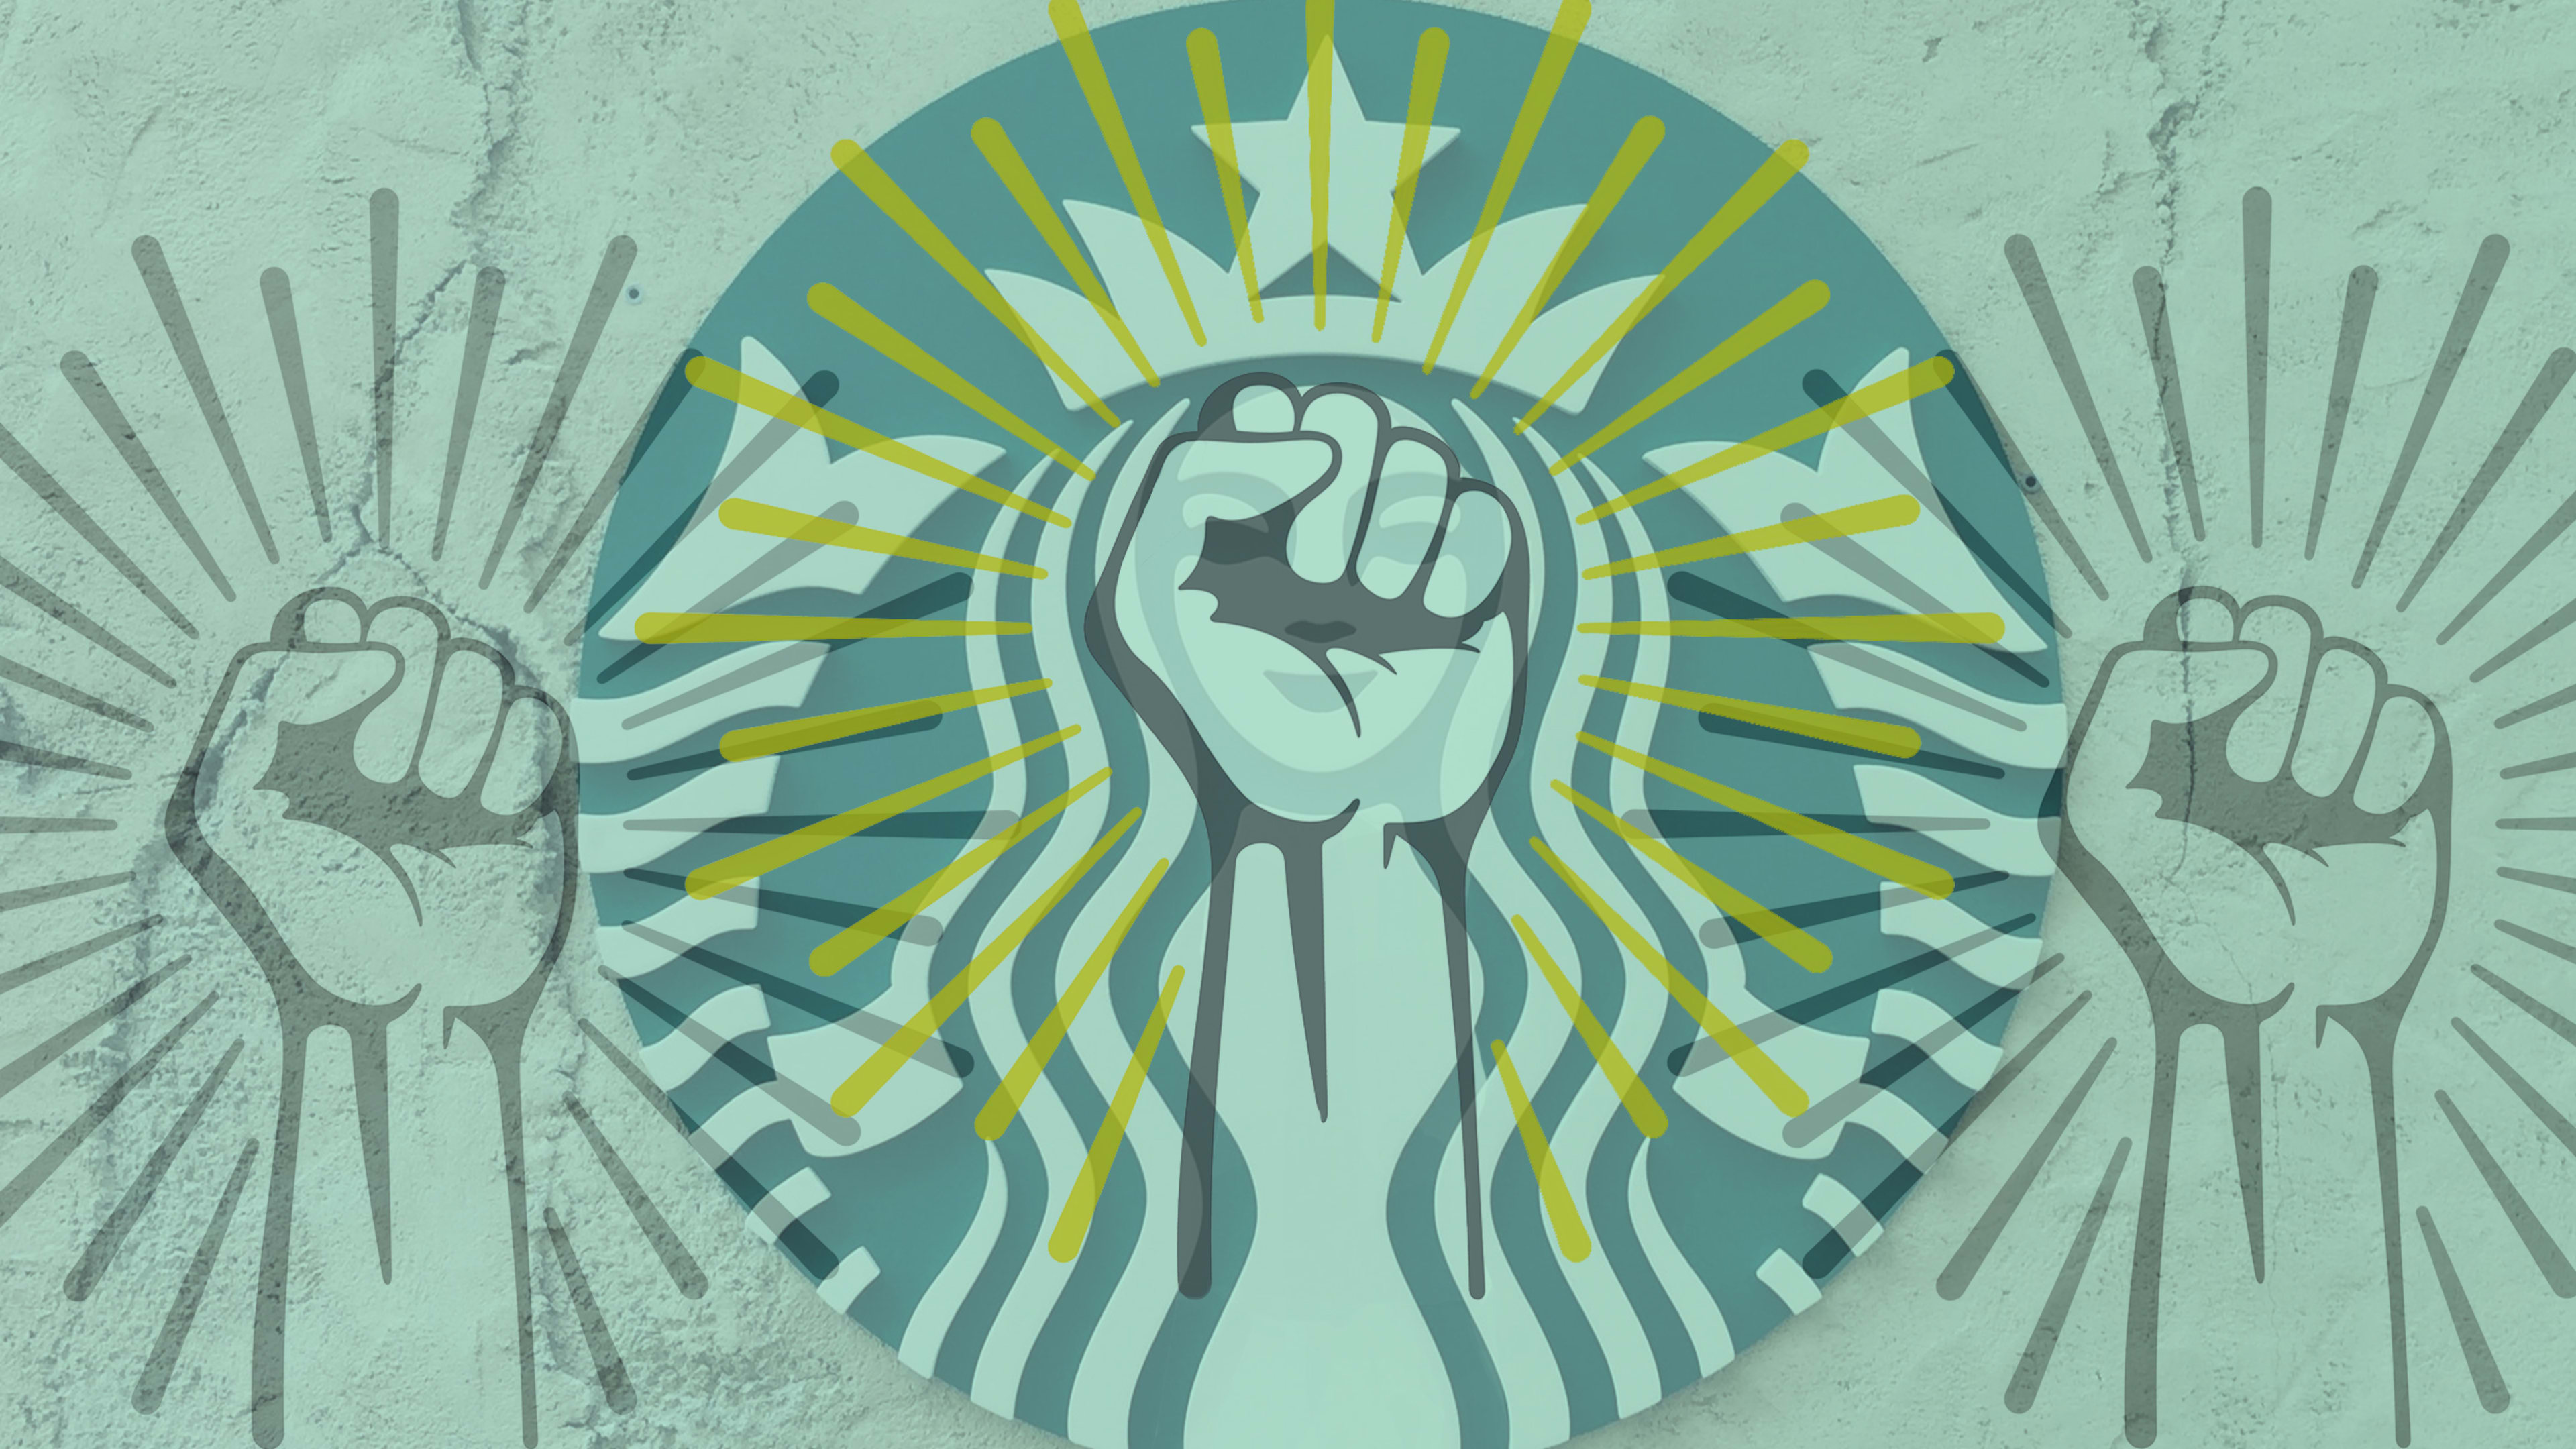 Starbucks’s long history of fending off unions may be coming to an end